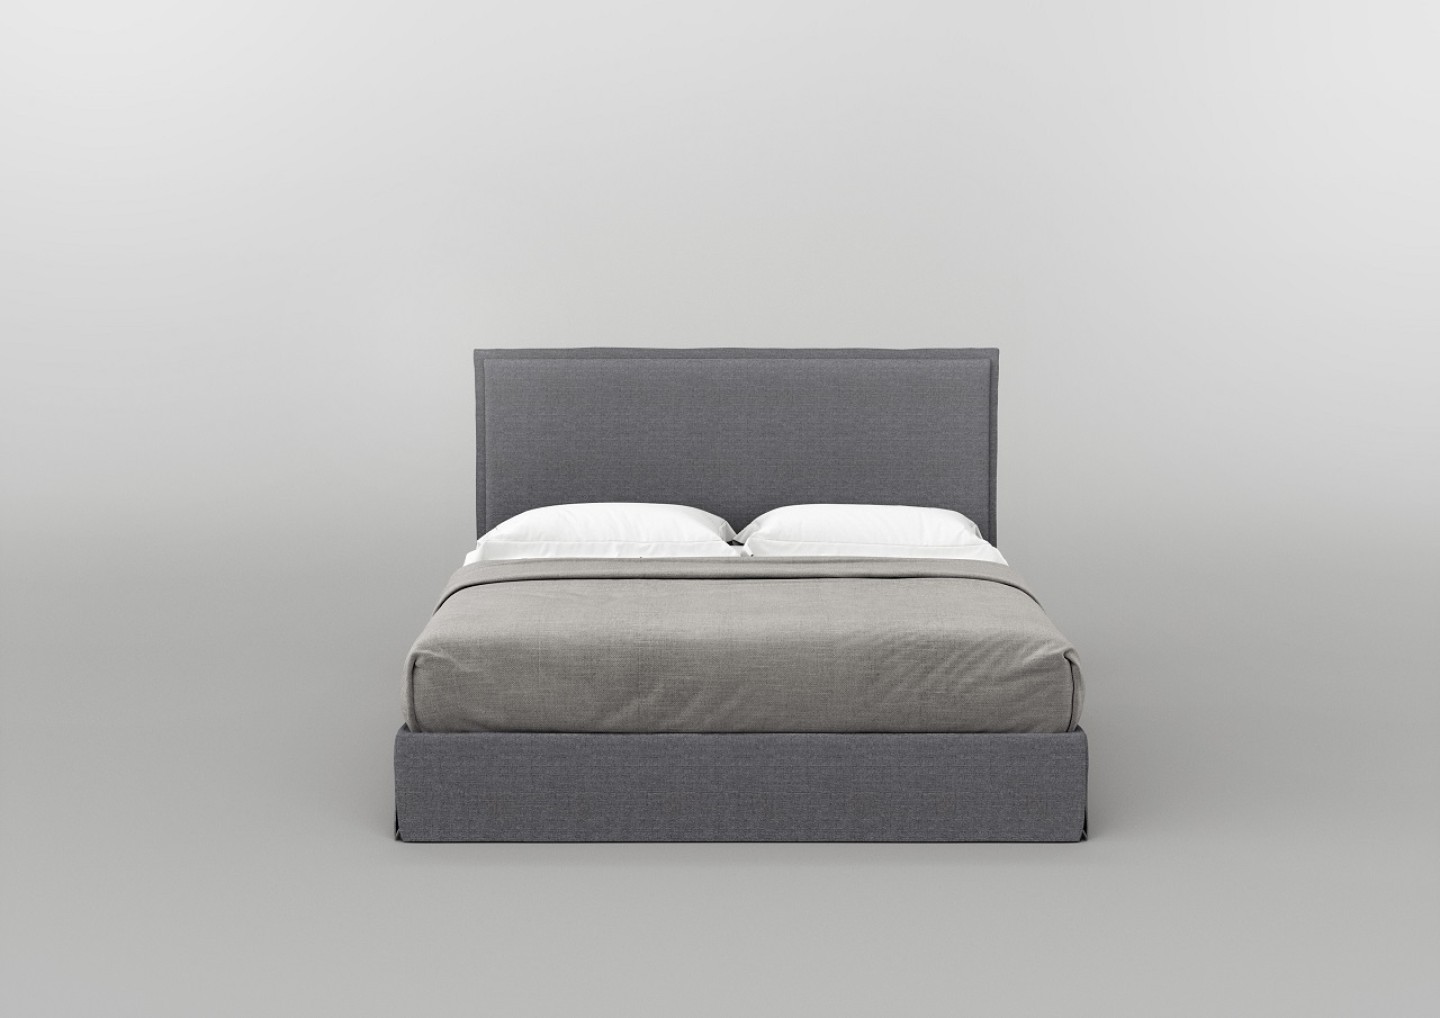 THE FUNKY BED by Elite Strom